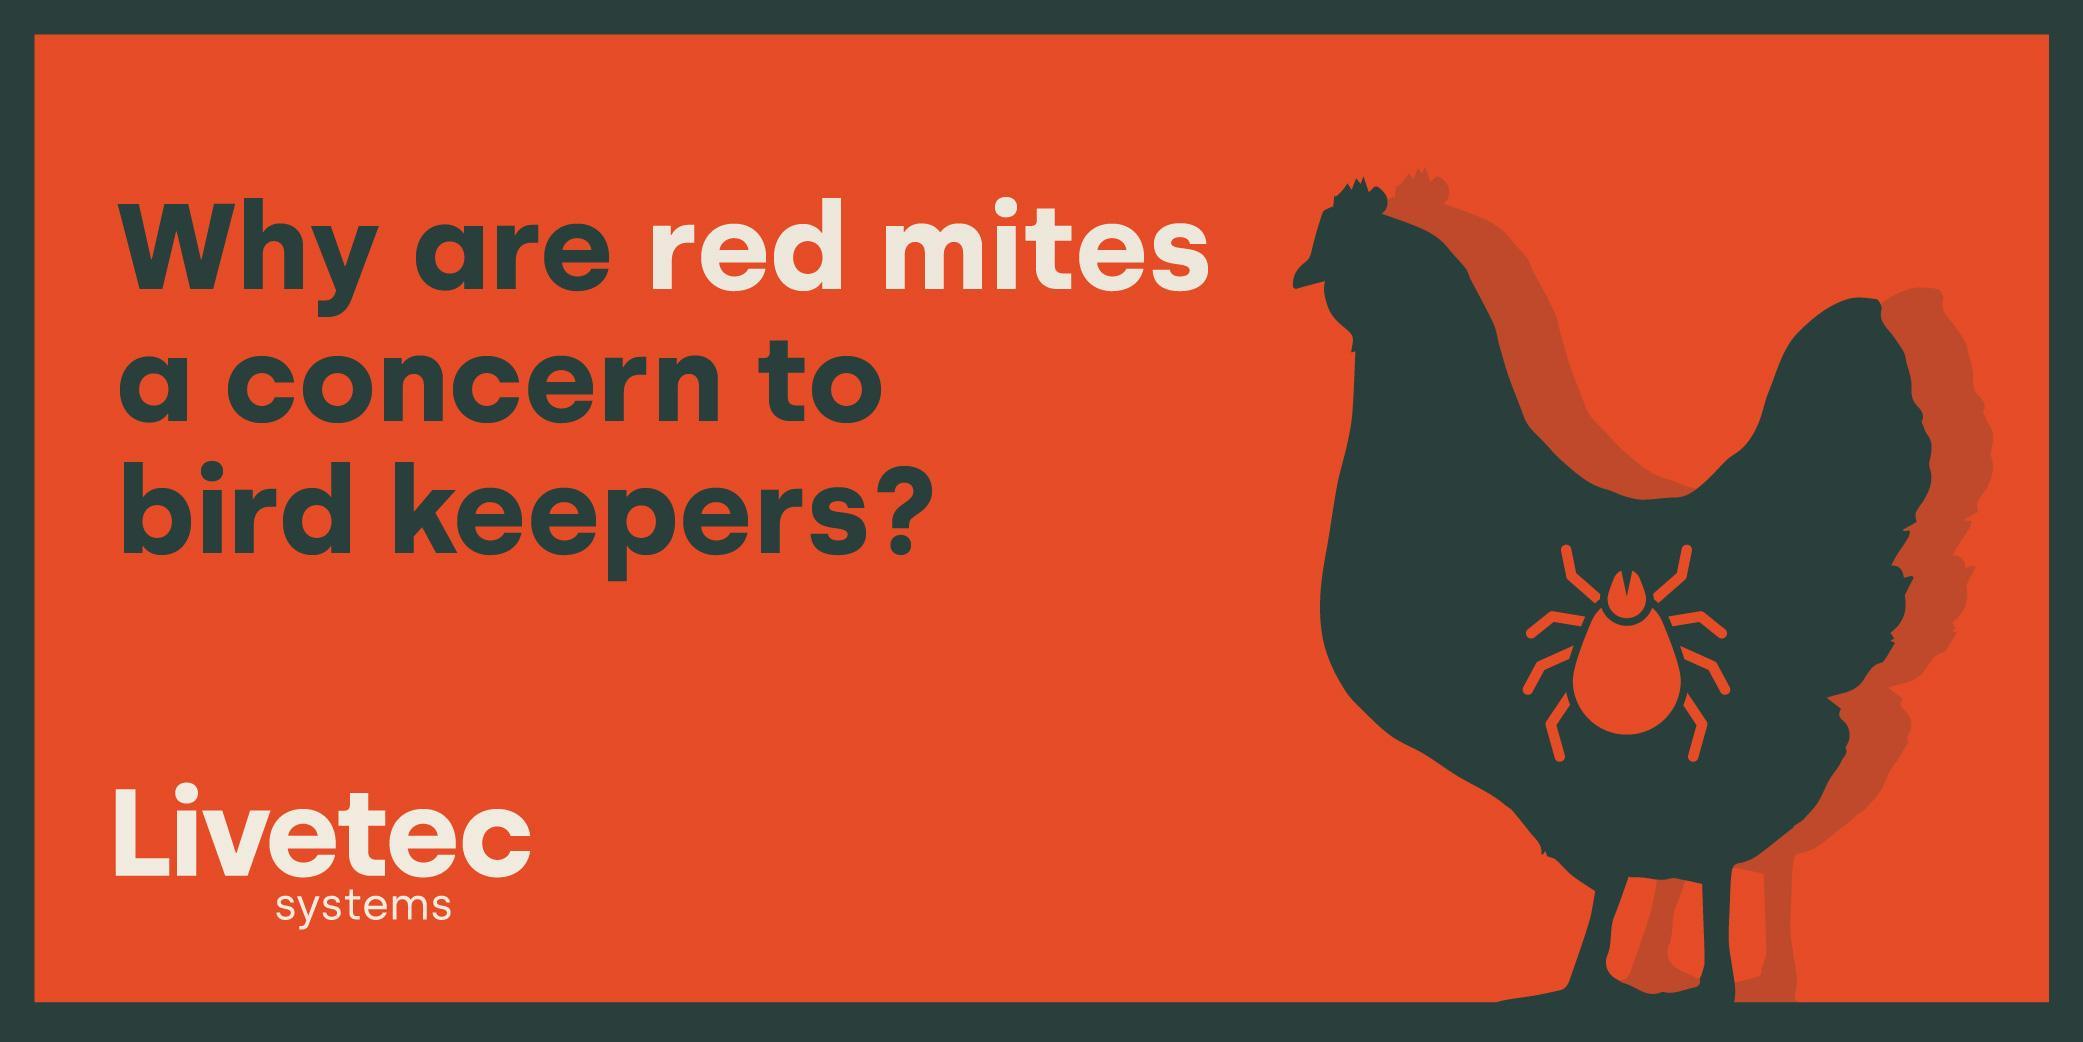 Why are red mites a concern to bird keepers?